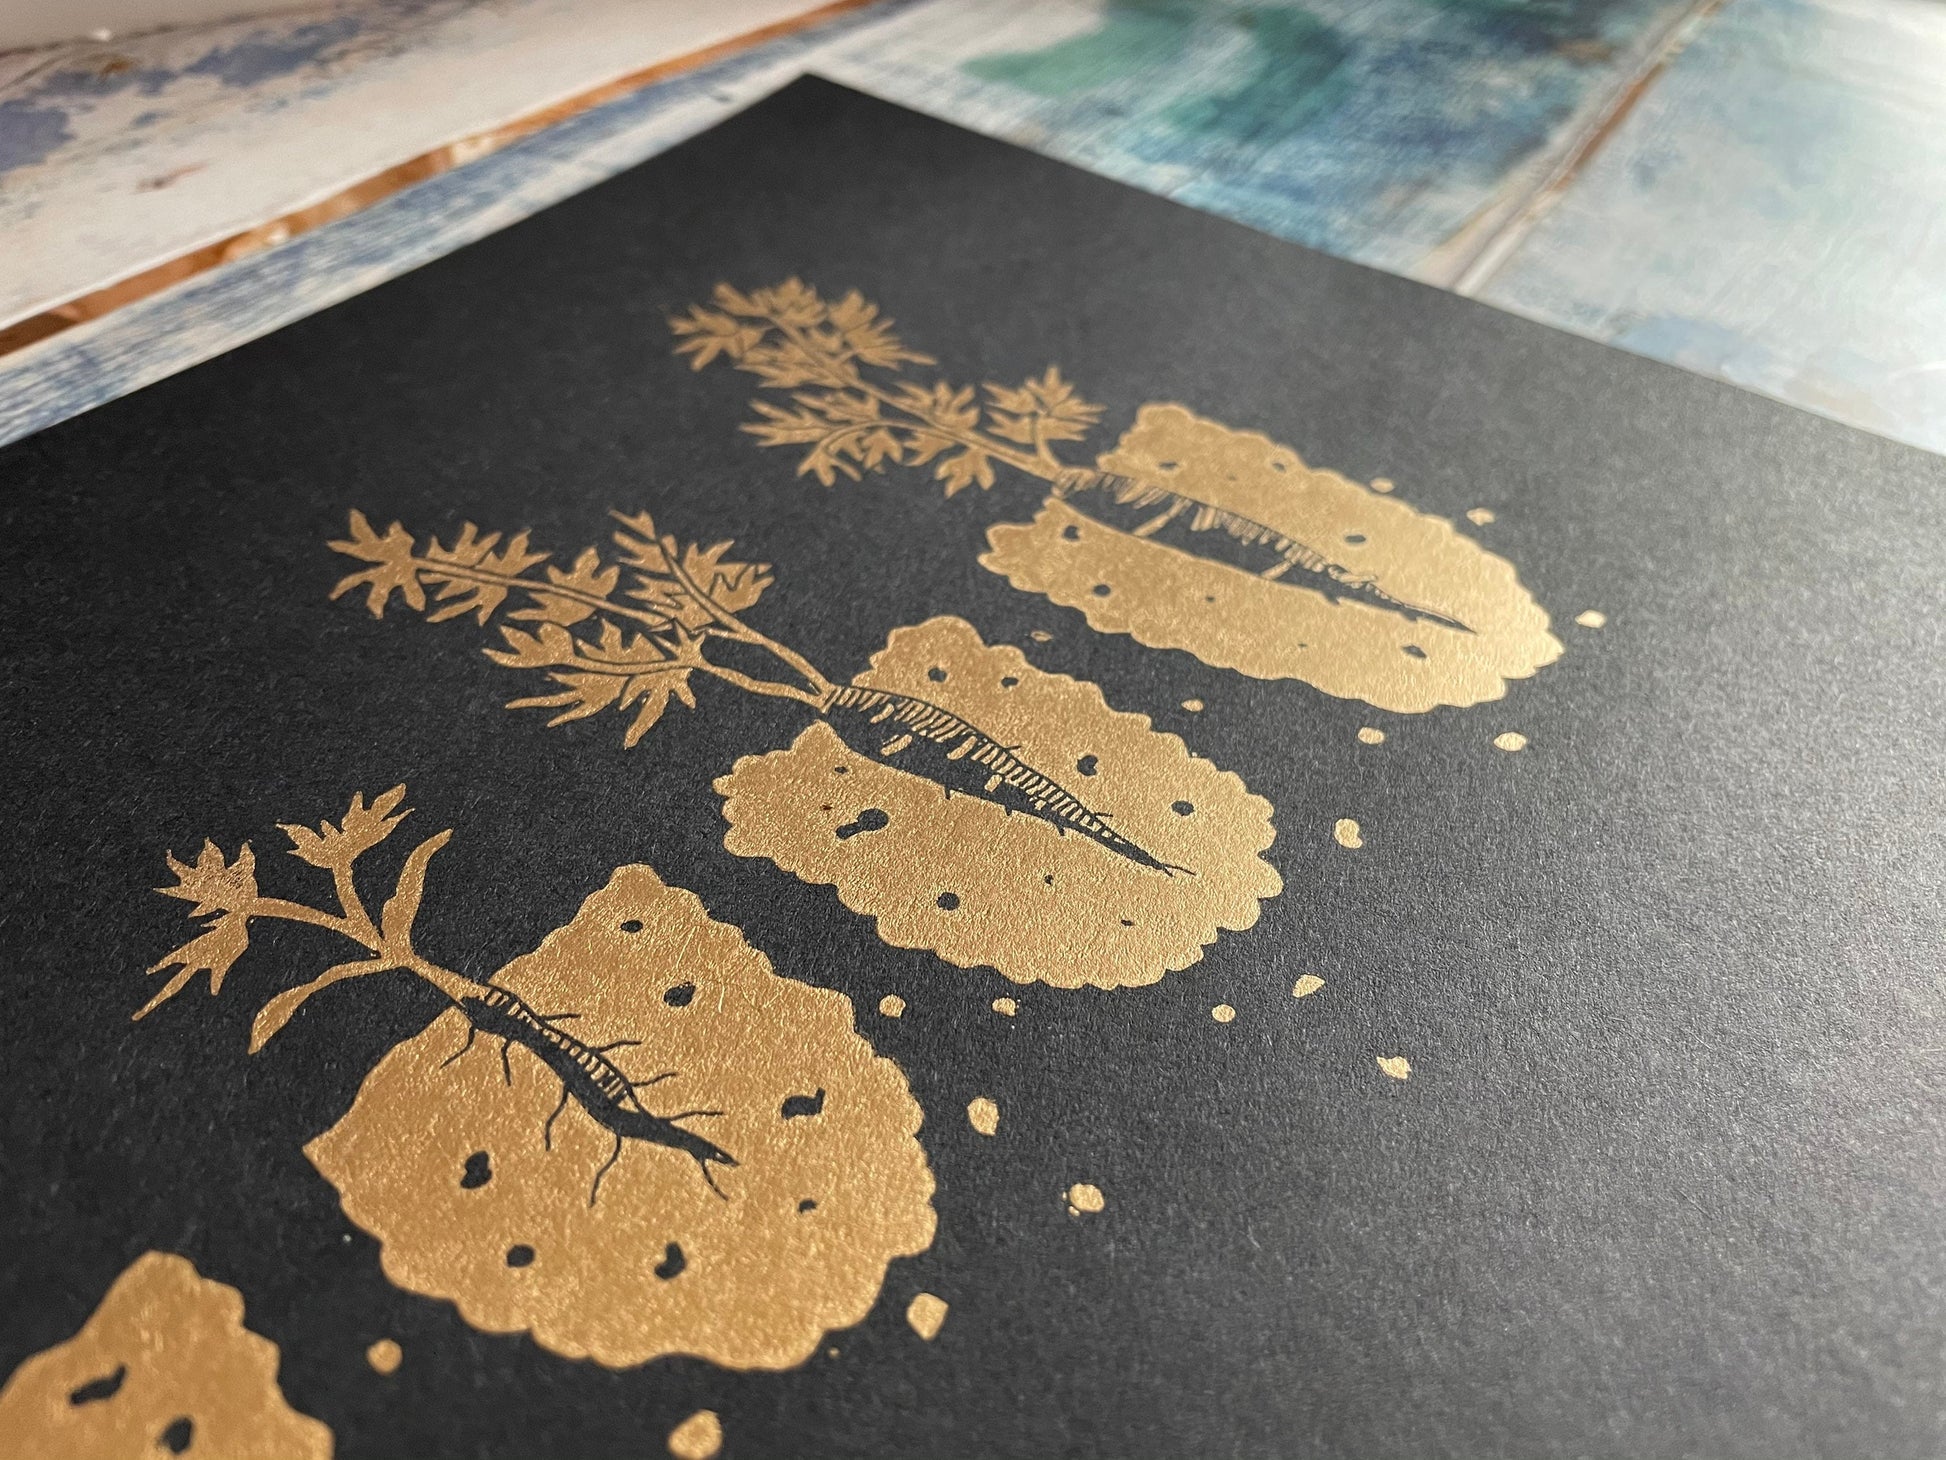 A lino print showing the different stages of a carrot growing from seedling to ready to pick in copper on black